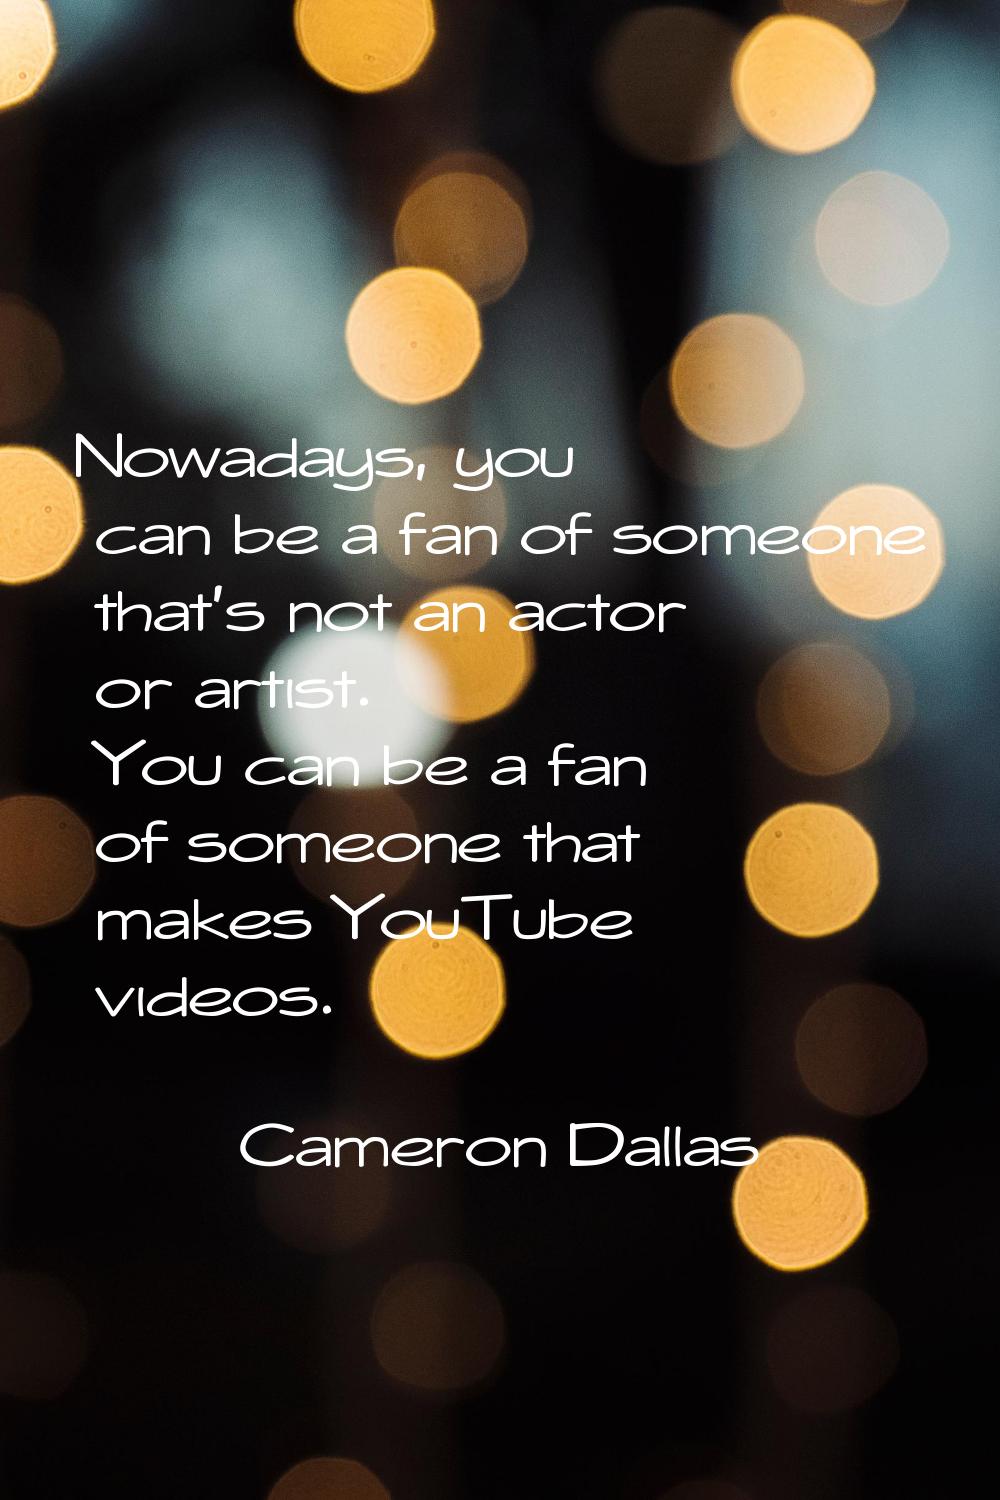 Nowadays, you can be a fan of someone that's not an actor or artist. You can be a fan of someone th